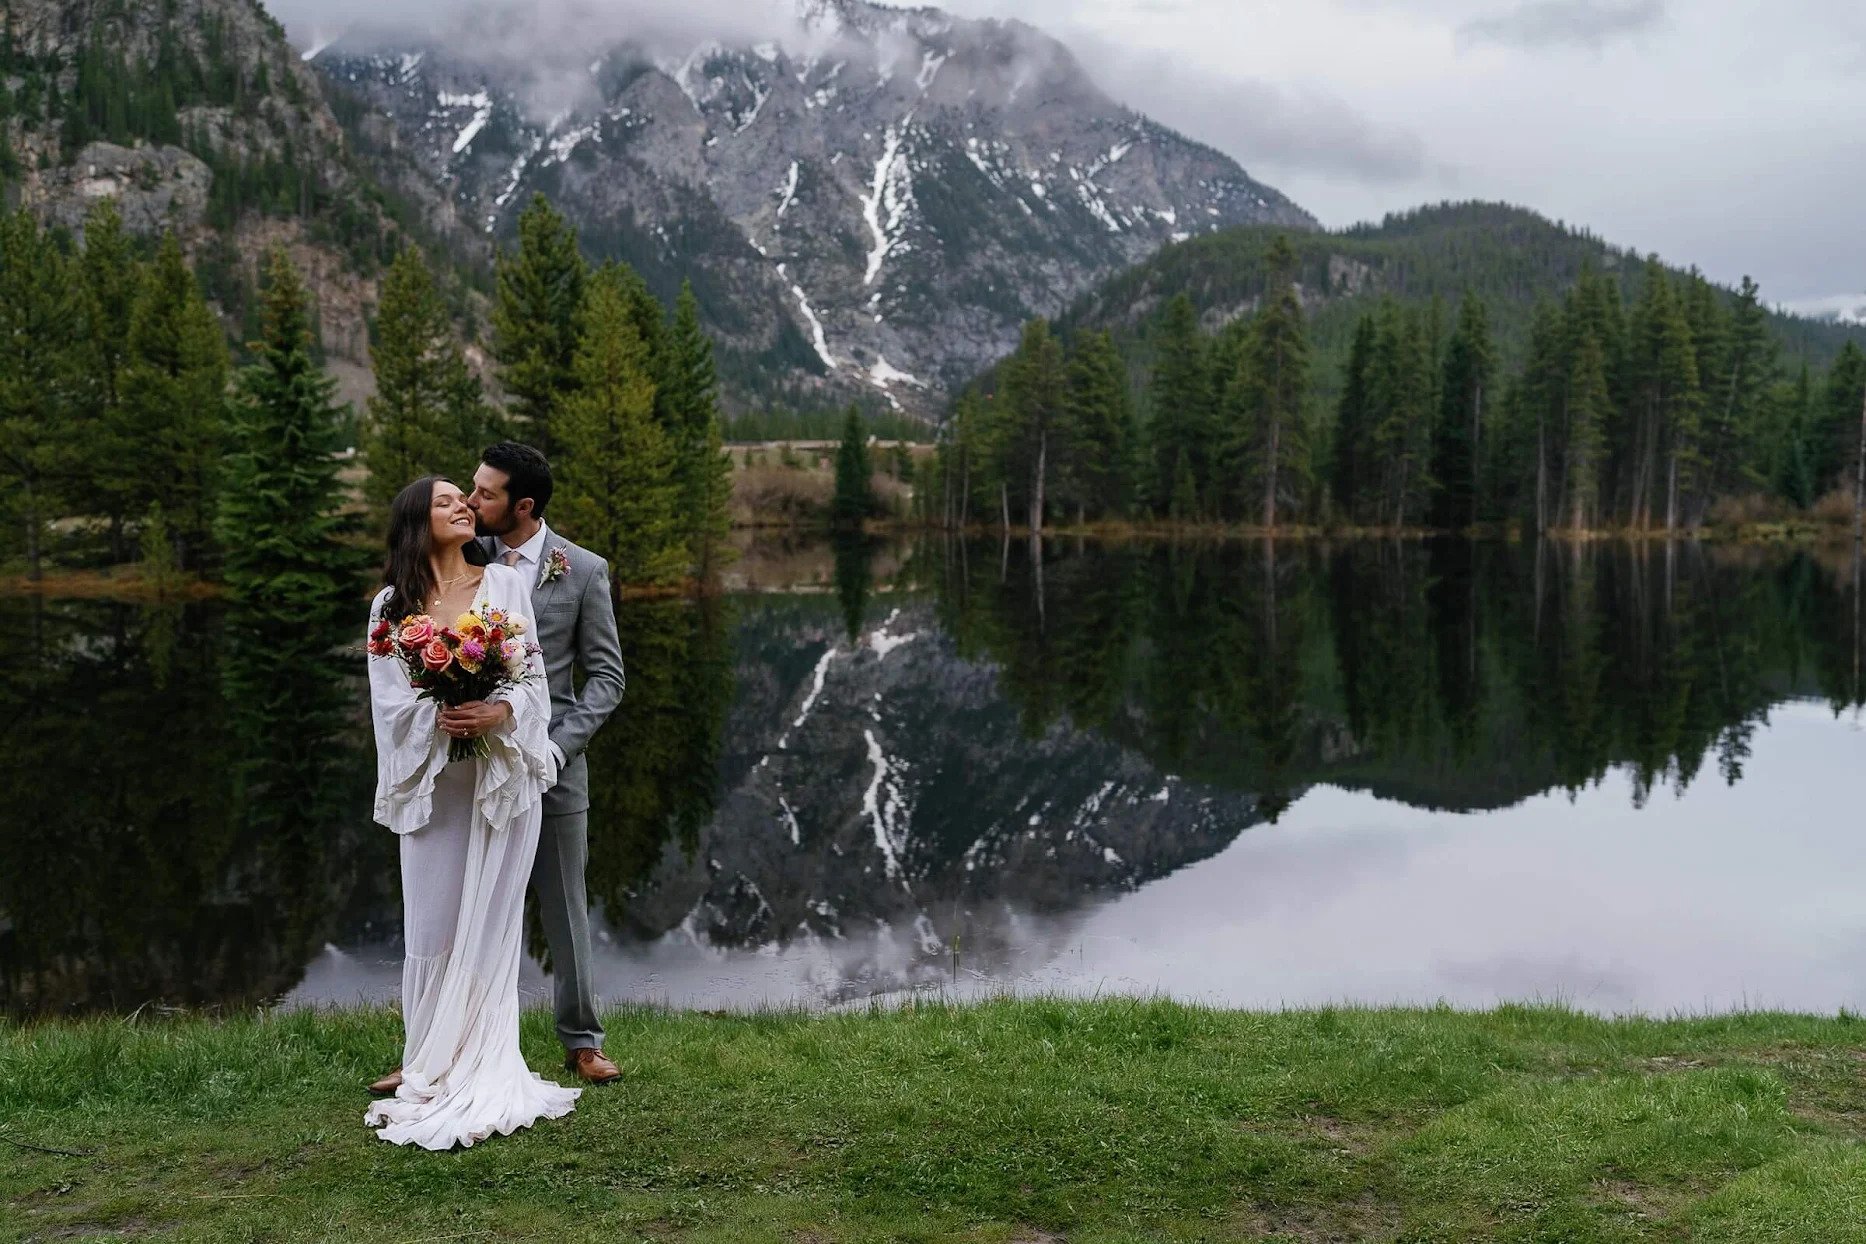 Newlyweds kiss by a lake in front of snowy mountains surf hotel wedding